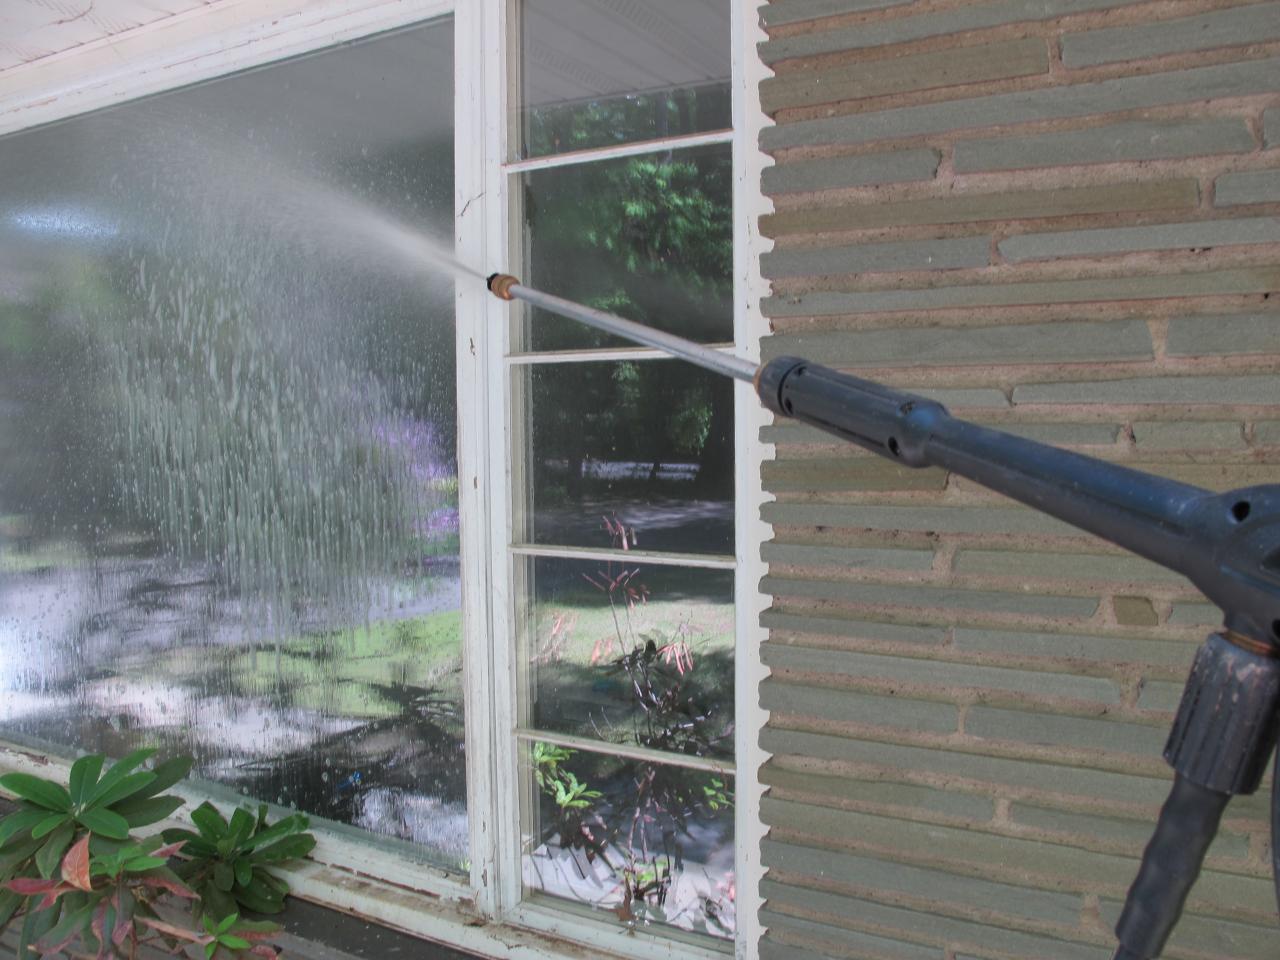 pressure-washing-tips-to-prevent-harm